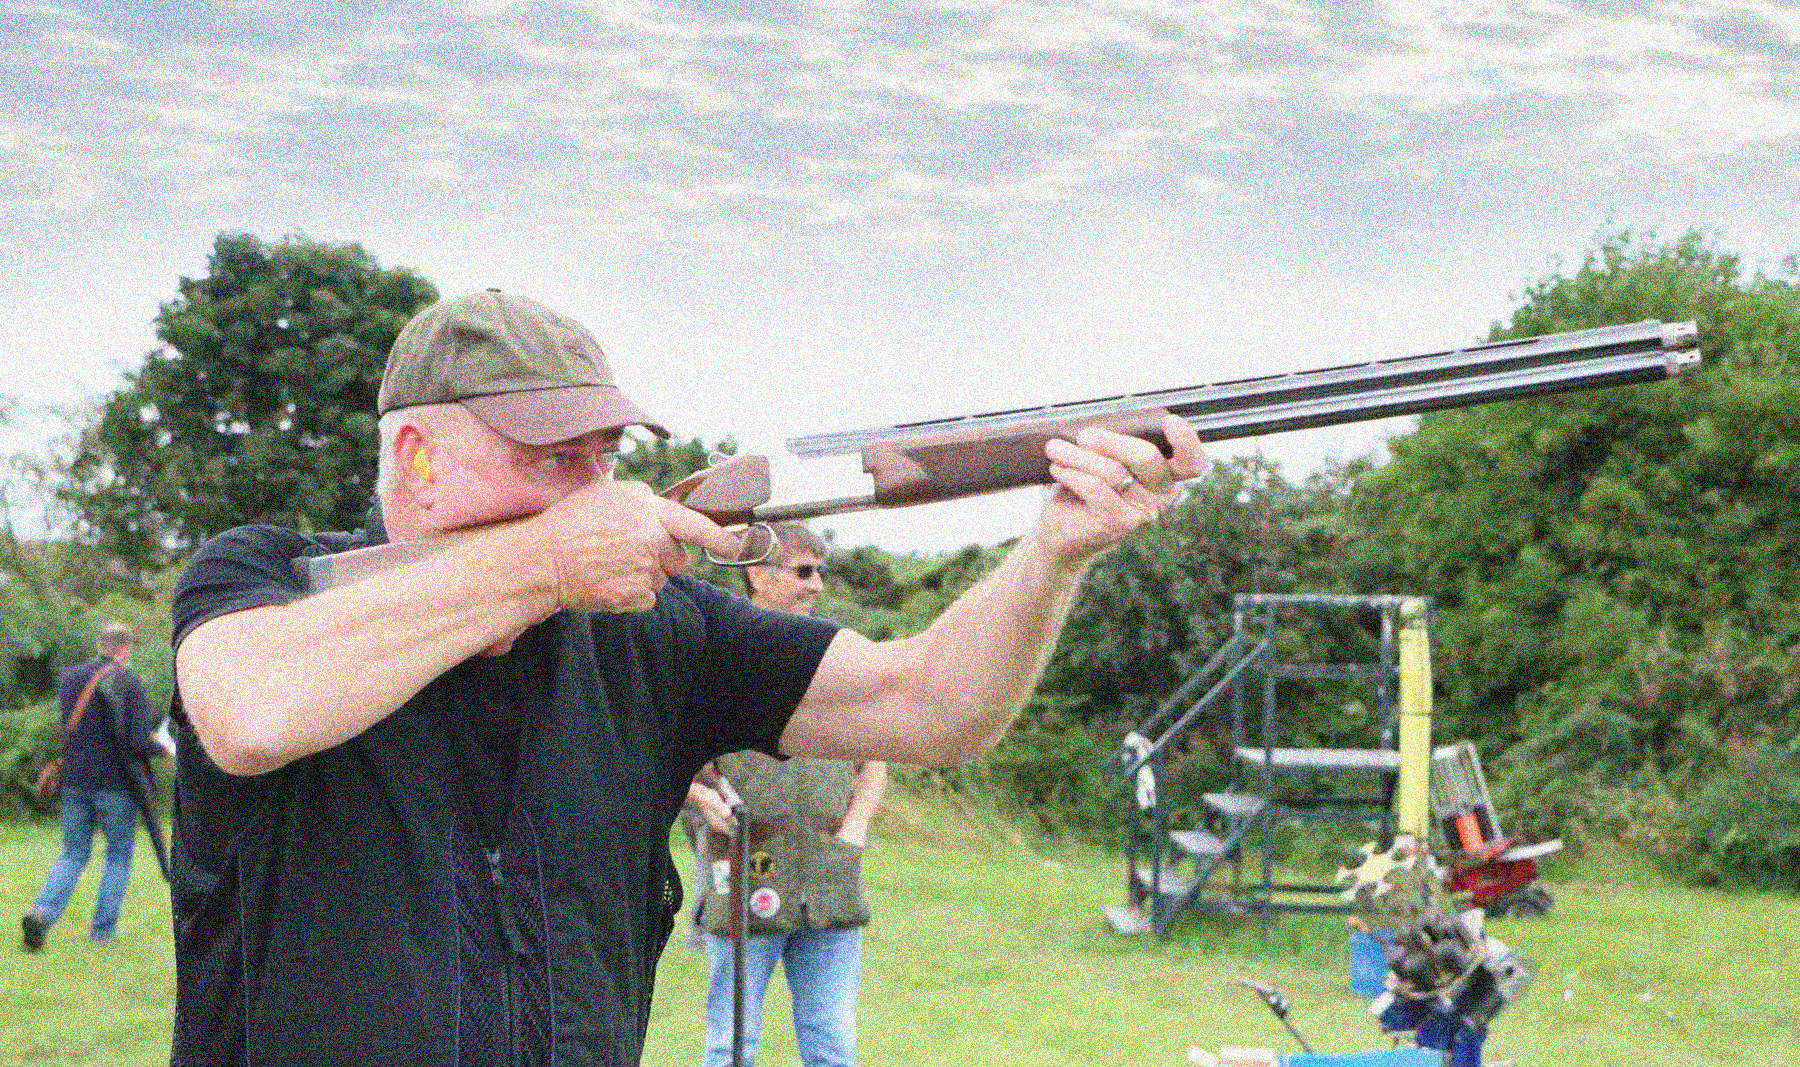 What choke for sporting clays?